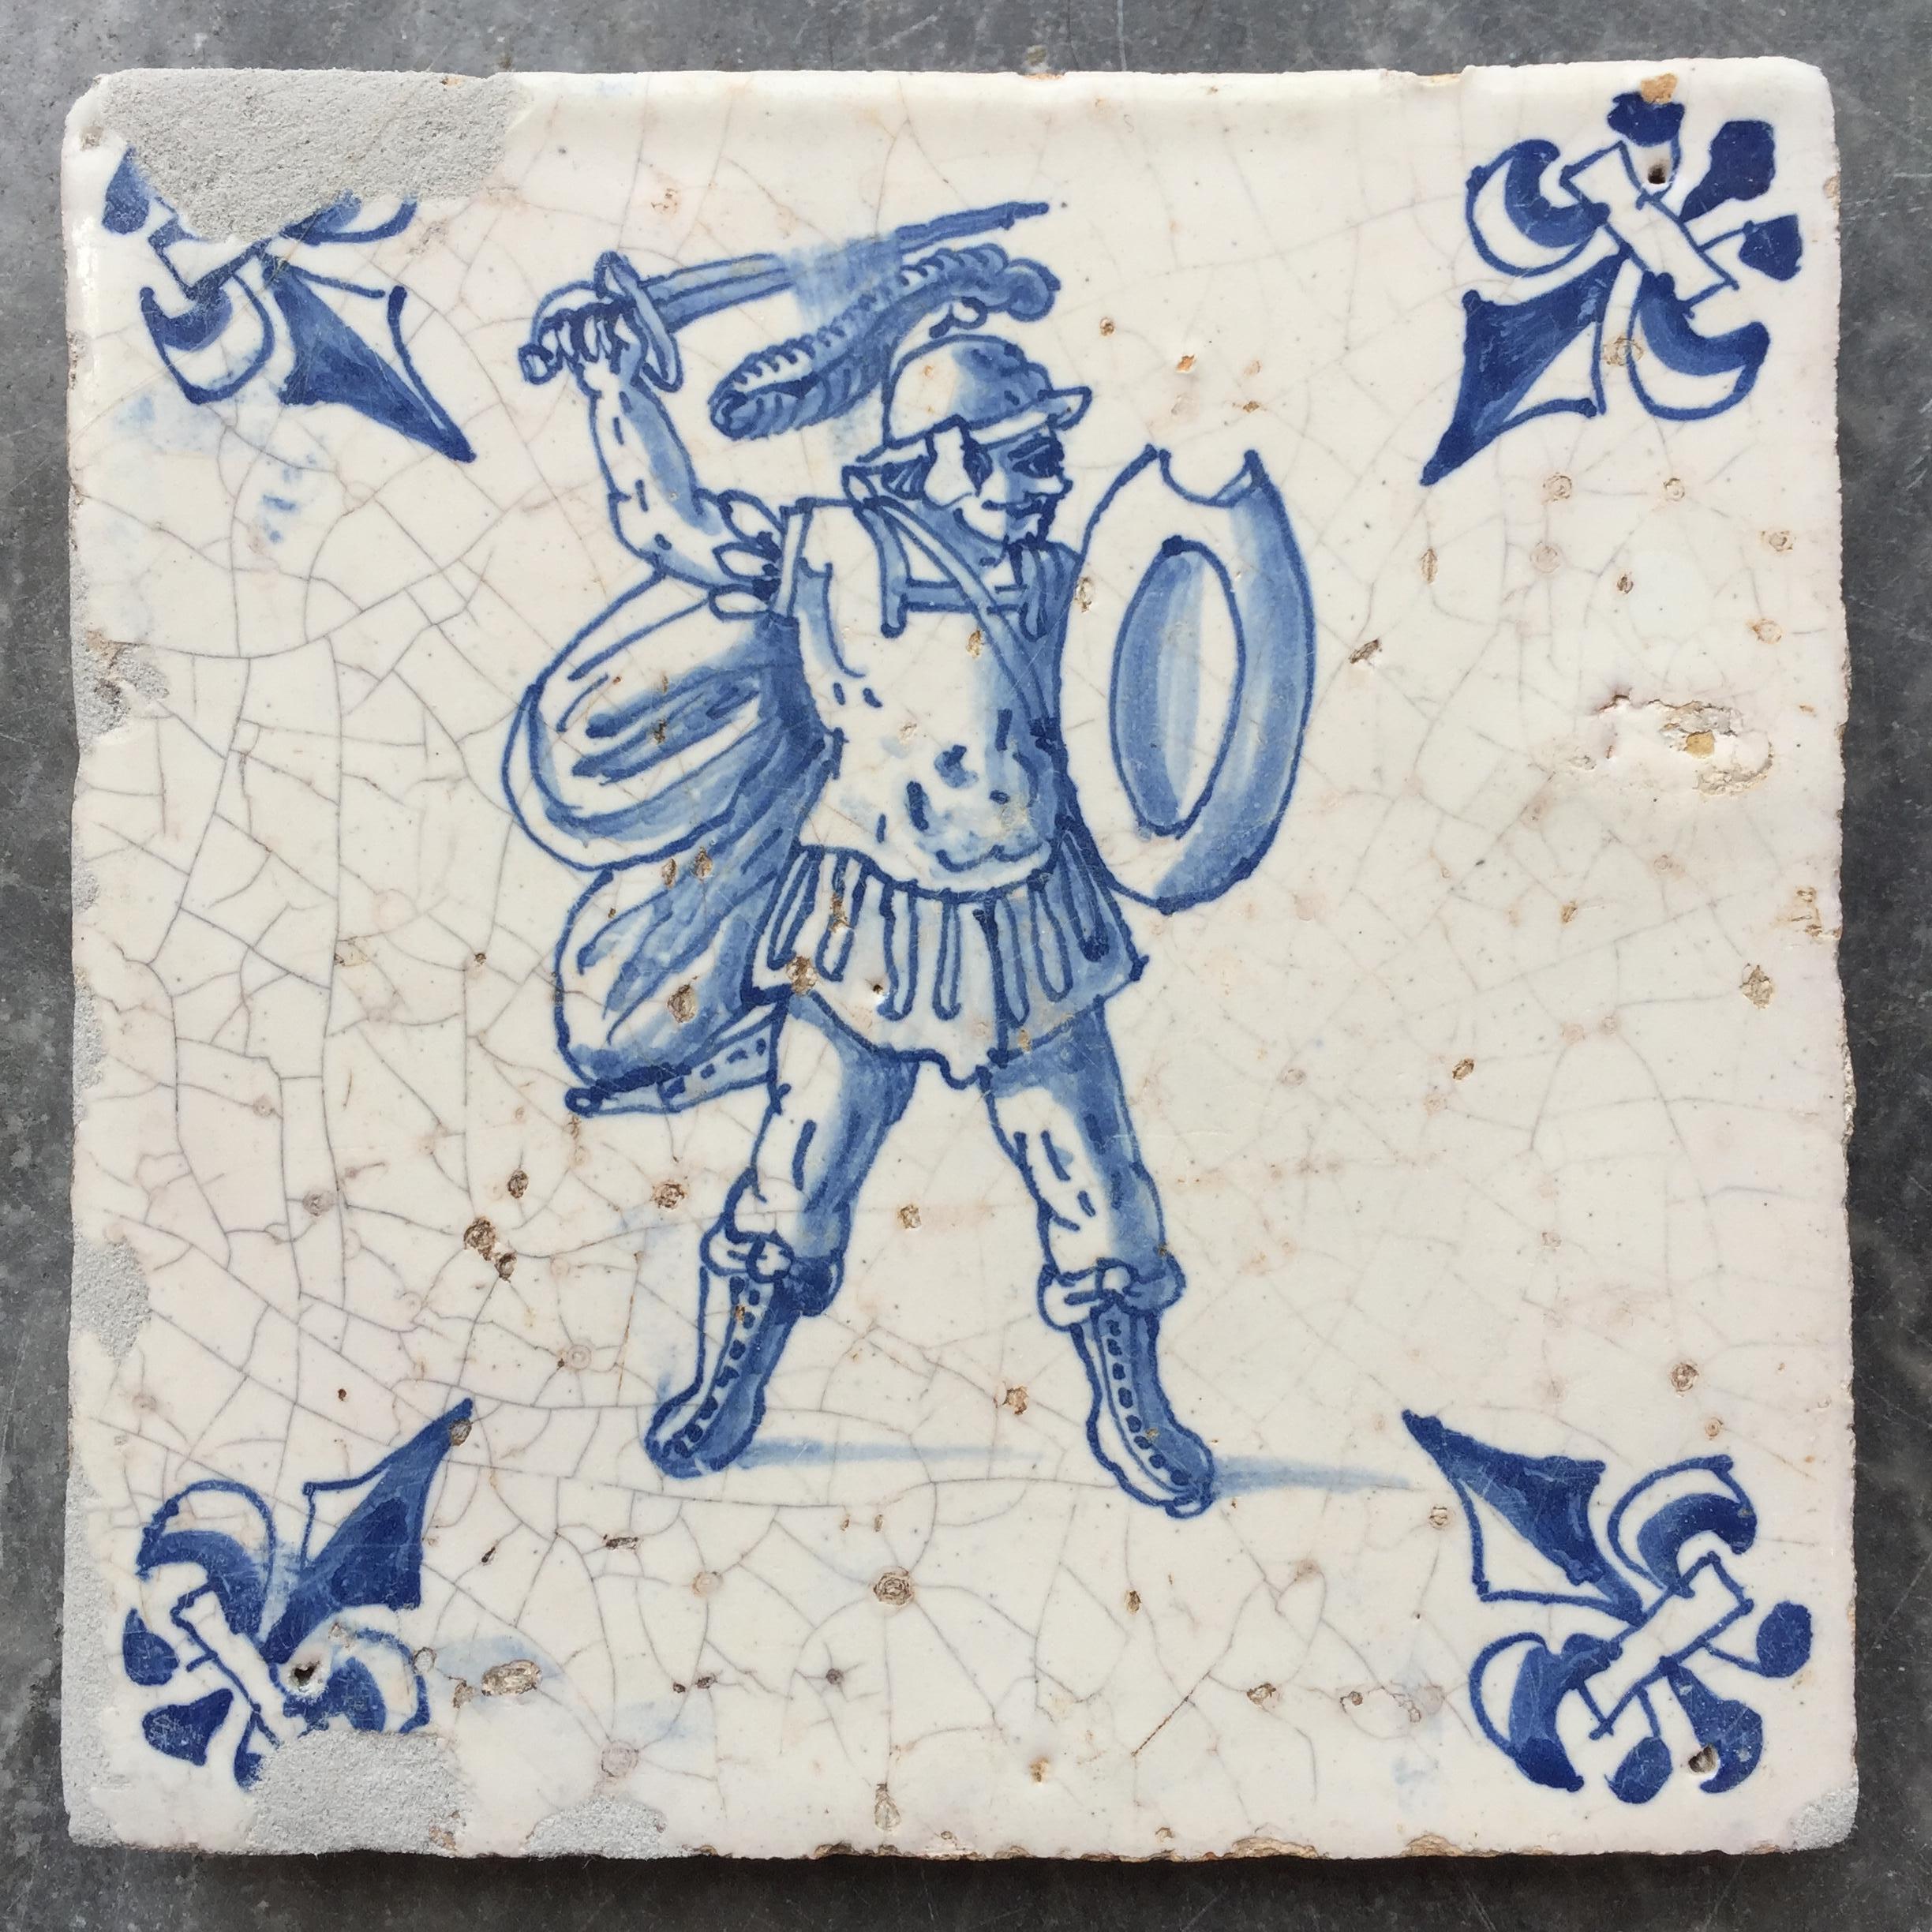 Exceptional Set of 20 Blue and White Dutch Delft Tiles with Figures 8